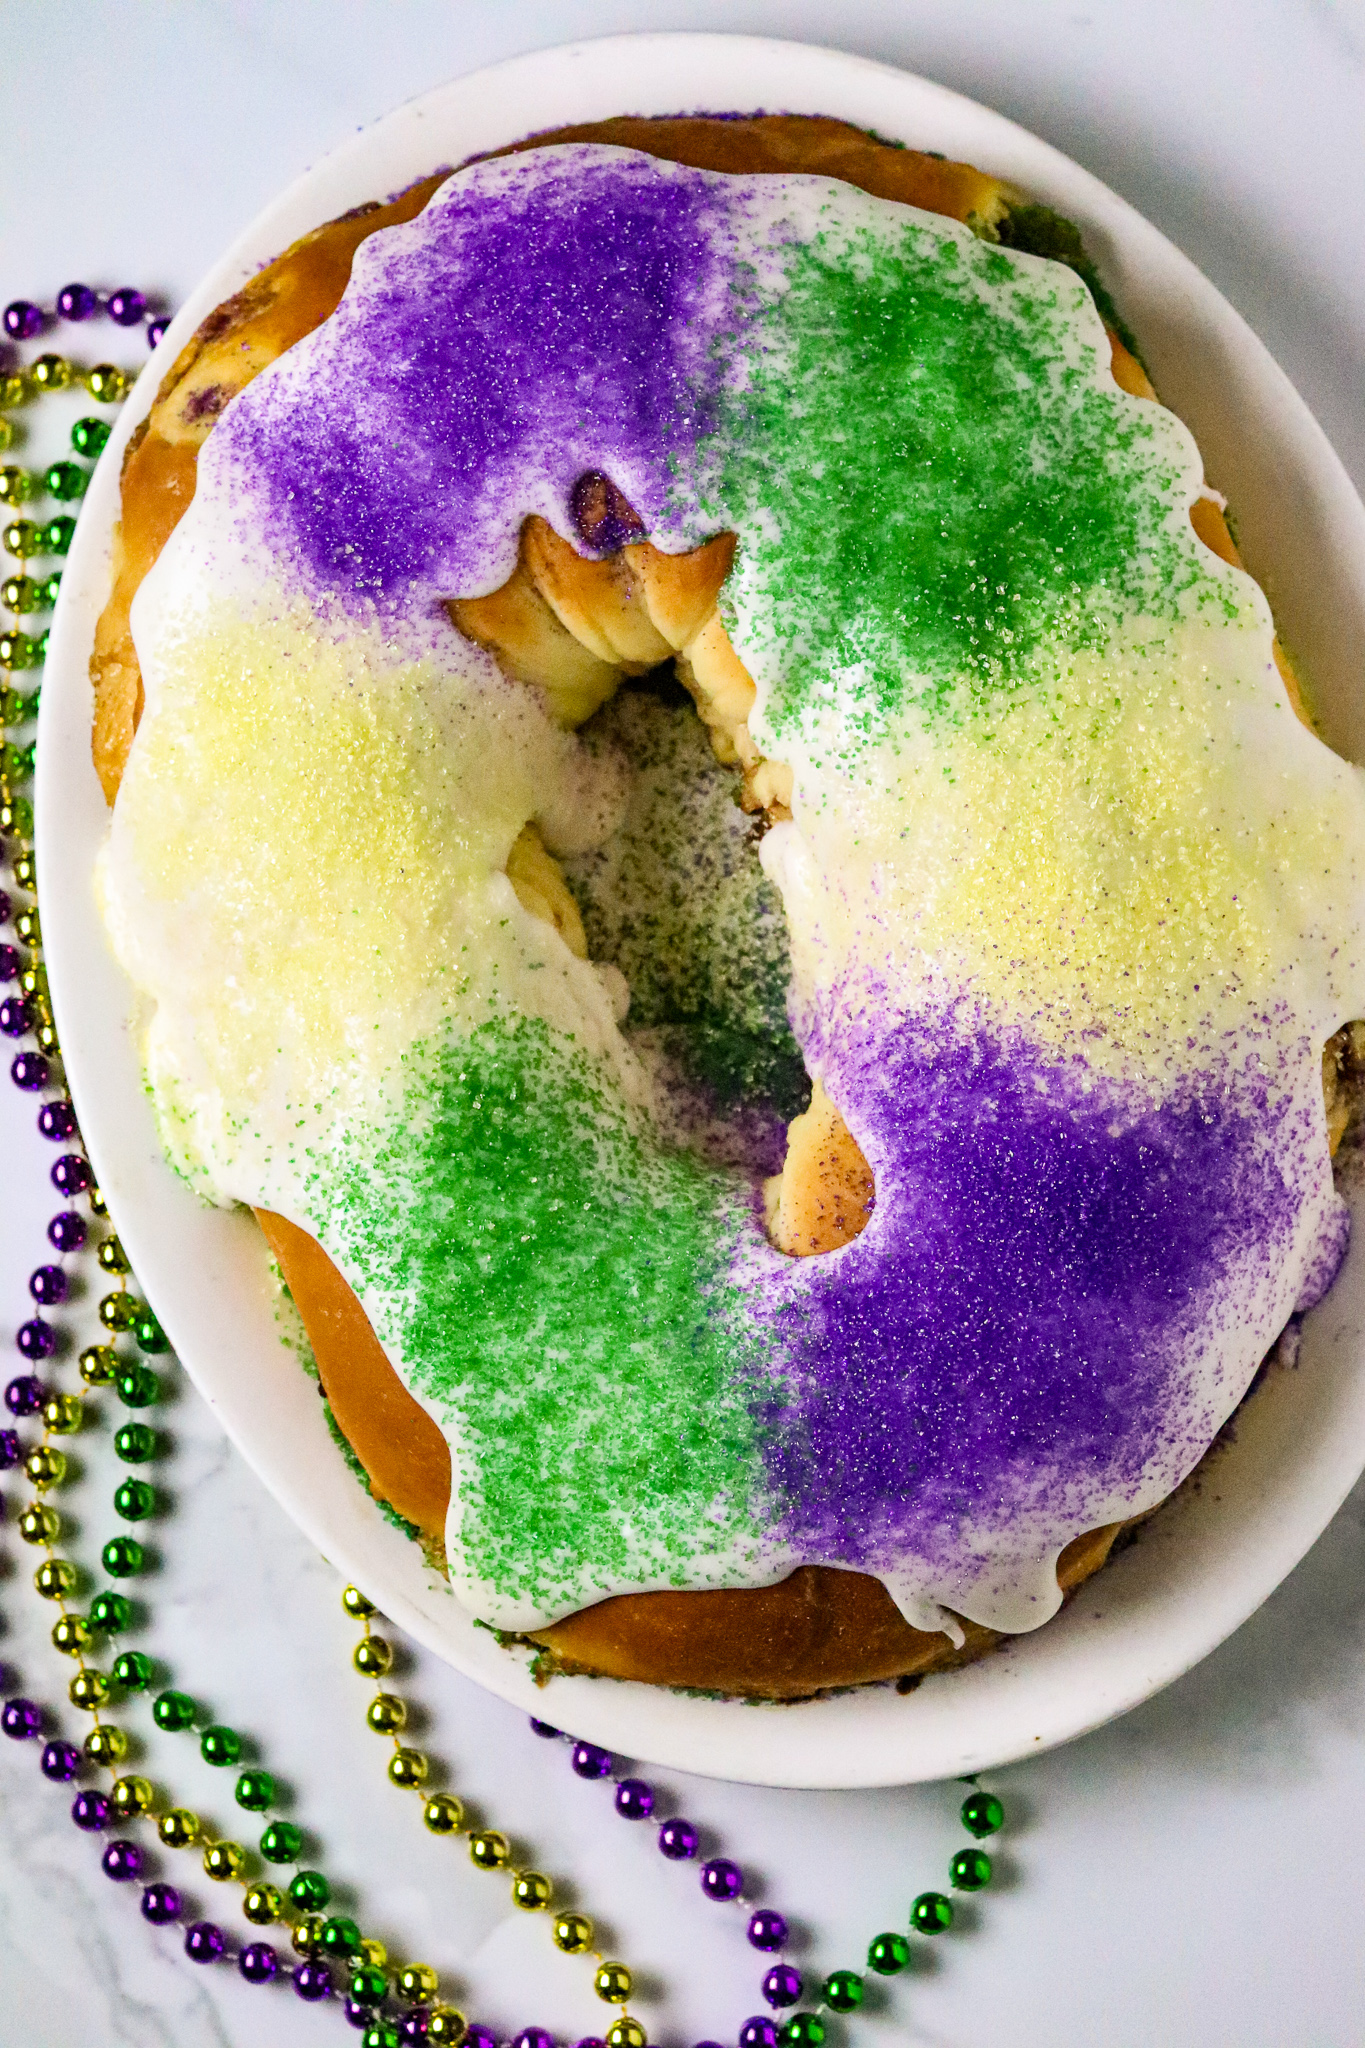 The King Cake Tradition, Explained - Eater